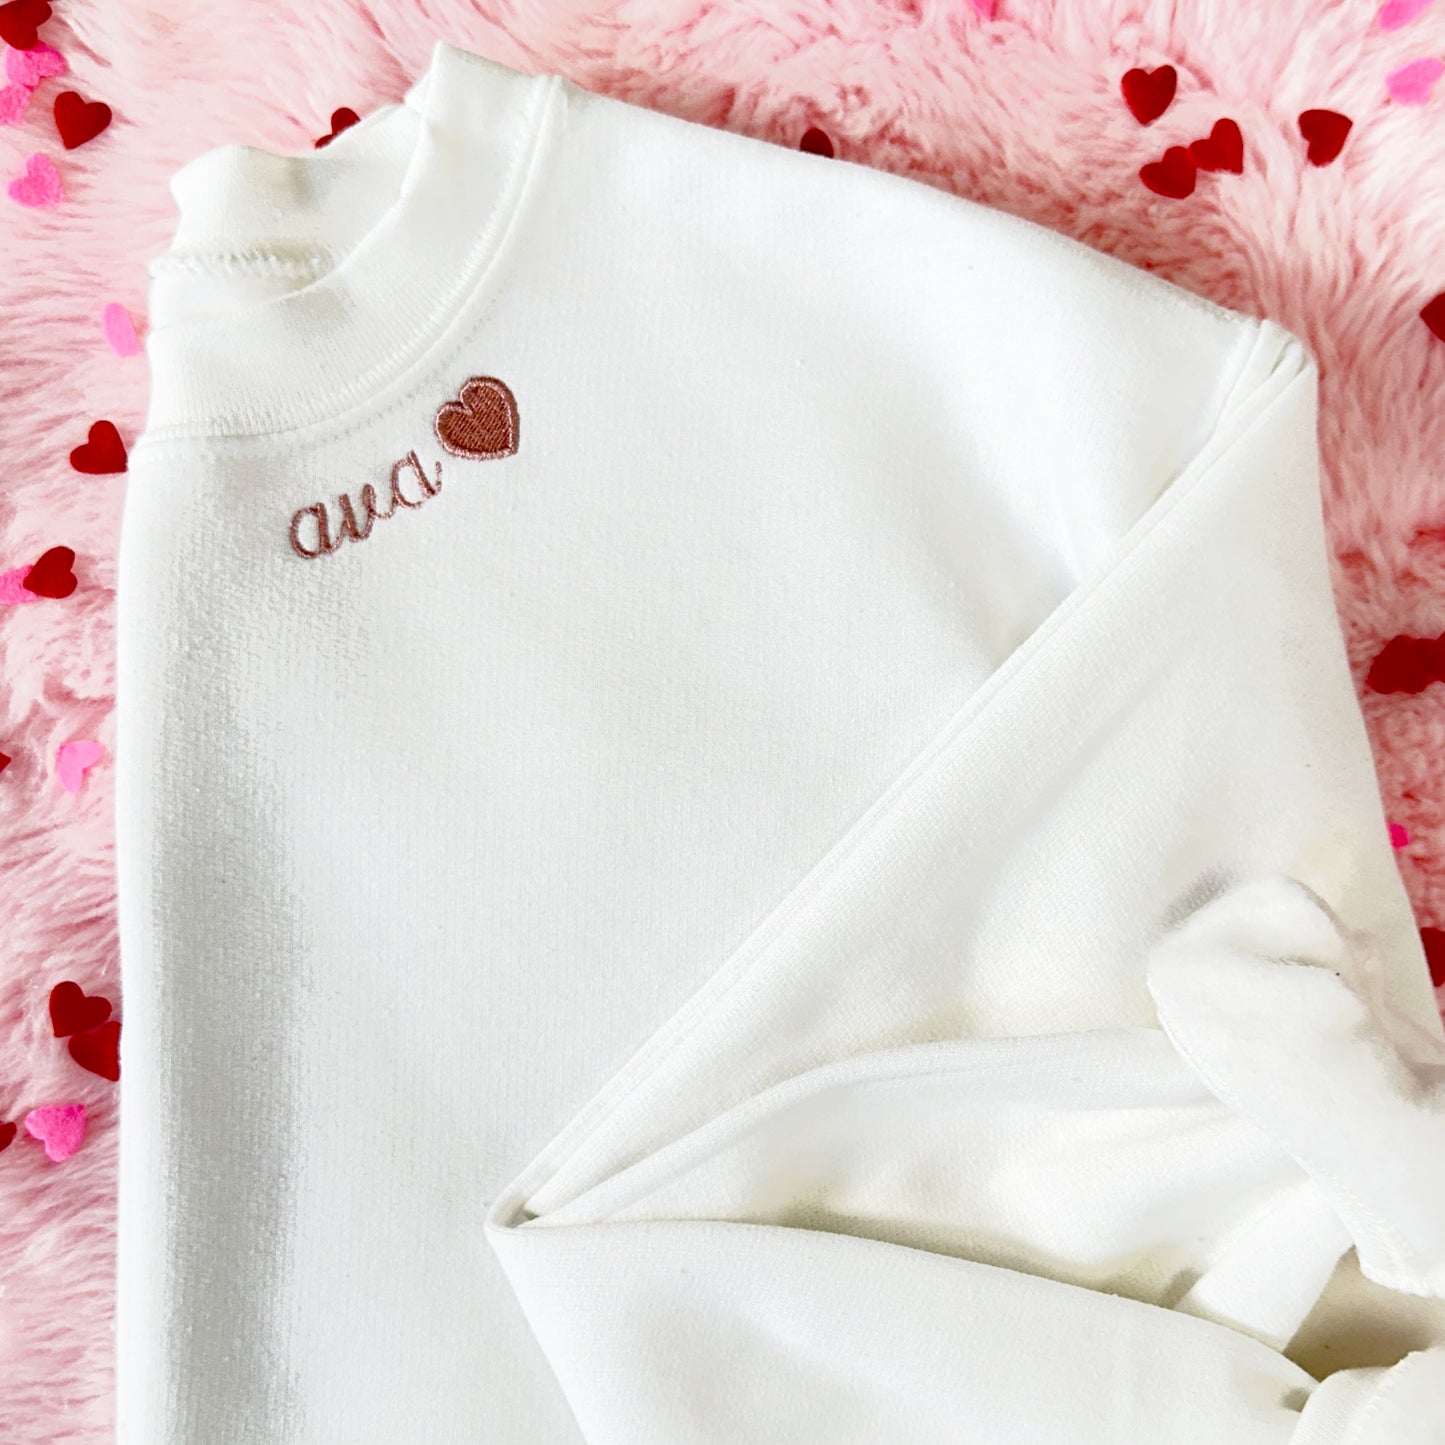 youth crewneck sweatshirt in white with a custom name neckline embroidery with mini heart